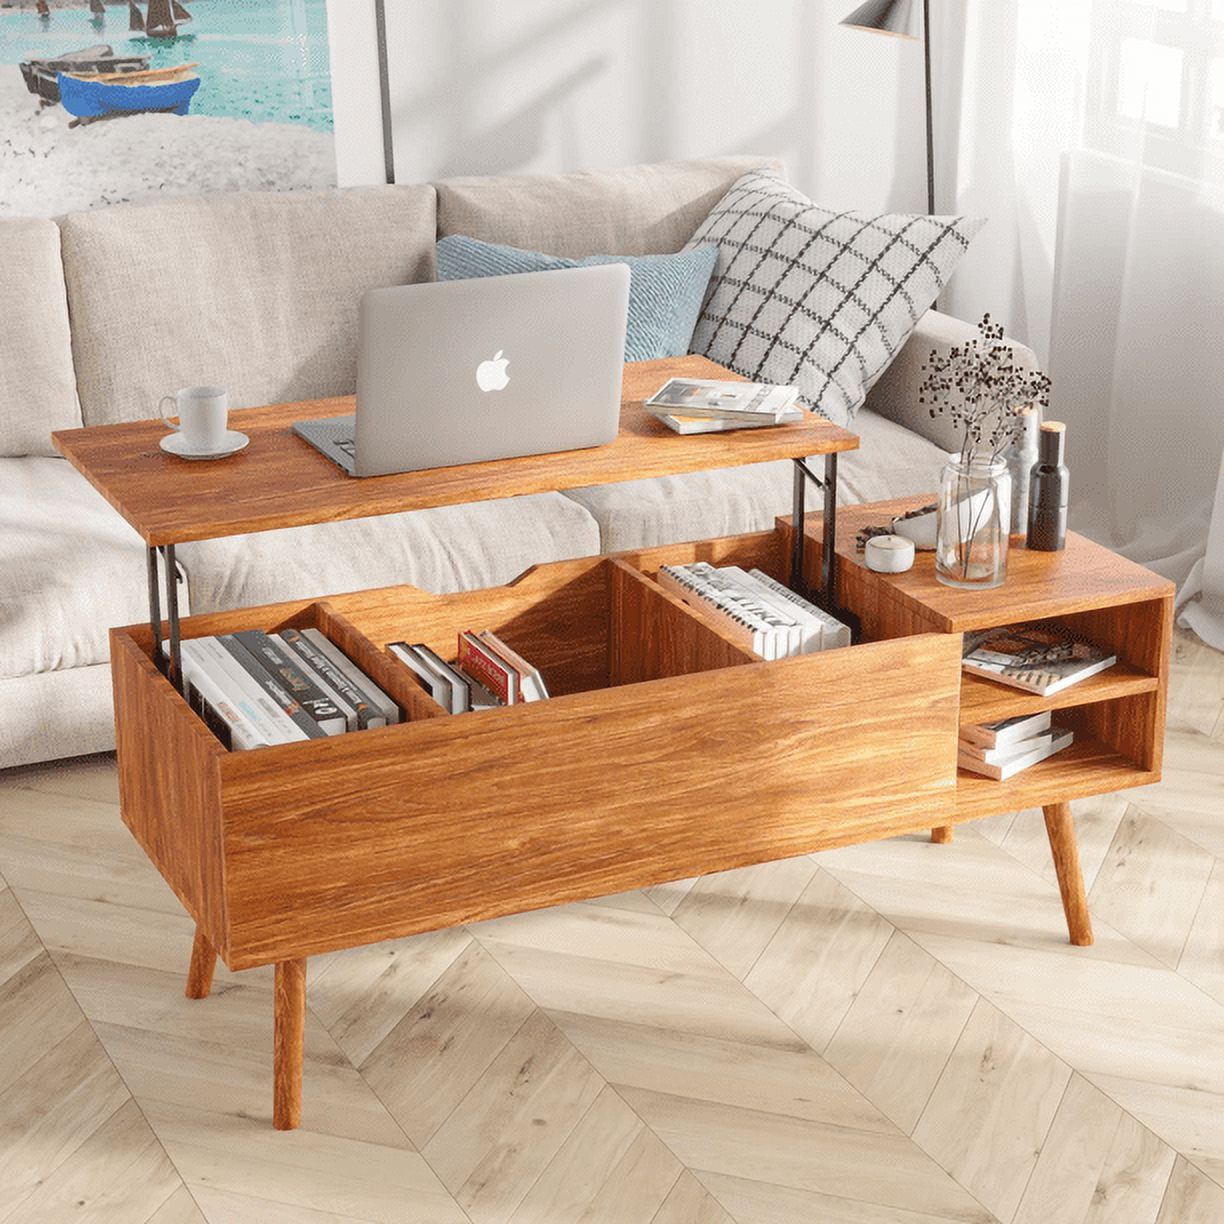 Modern Lift Top Coffee Table With Hidden Compartment Storage,Adjustable  Wood Table For Living Room,Brown – Walmart For Lift Top Coffee Tables With Storage (View 3 of 15)